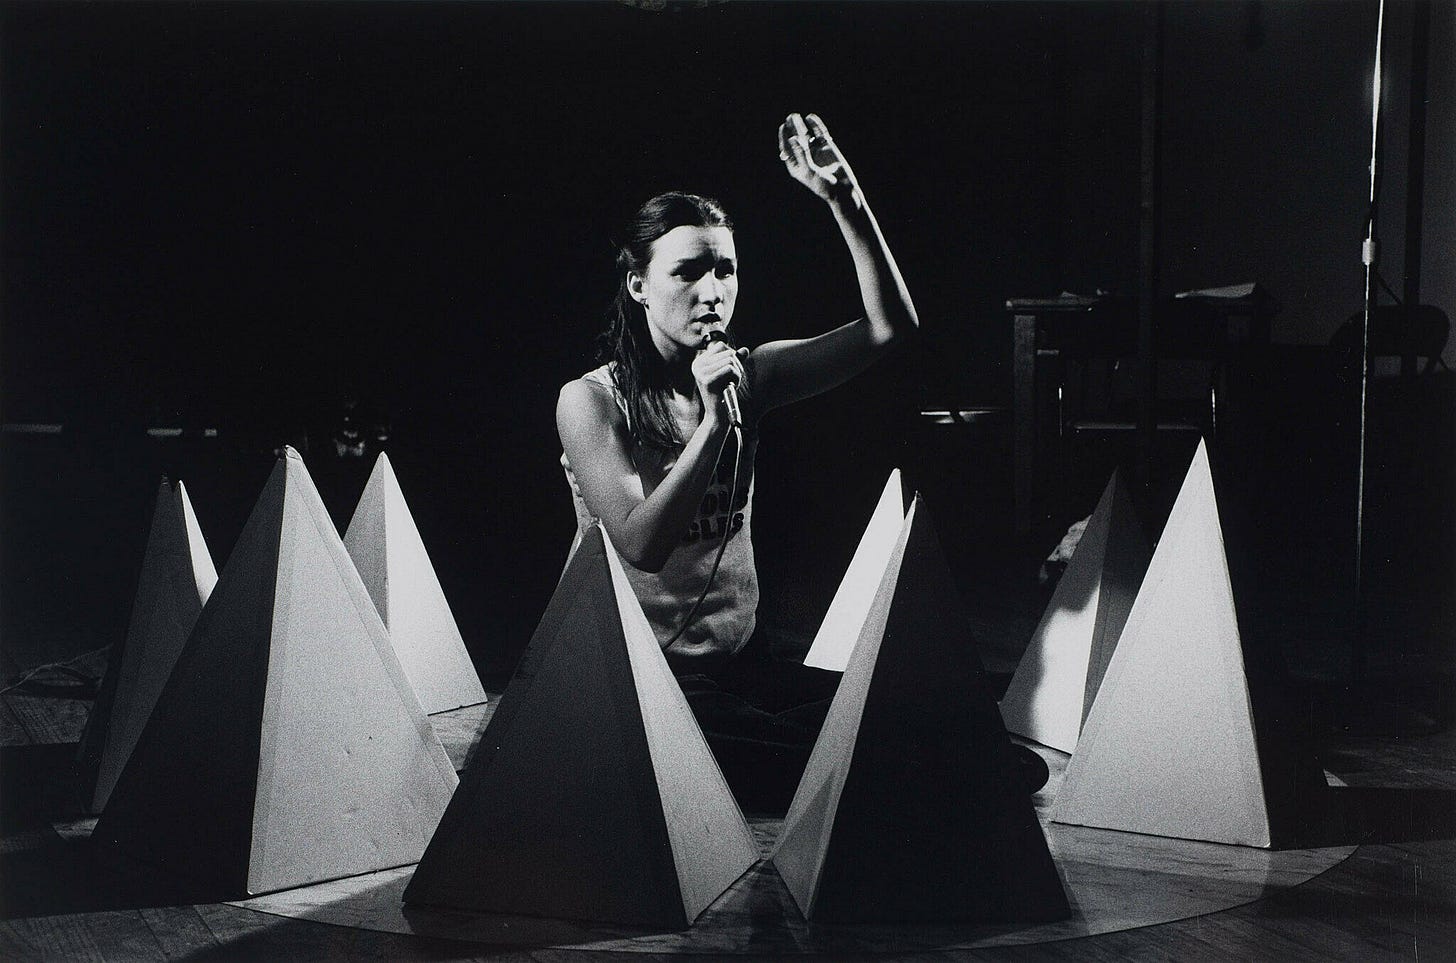 A woman kneels on a stage surrounded by sculptural objects.